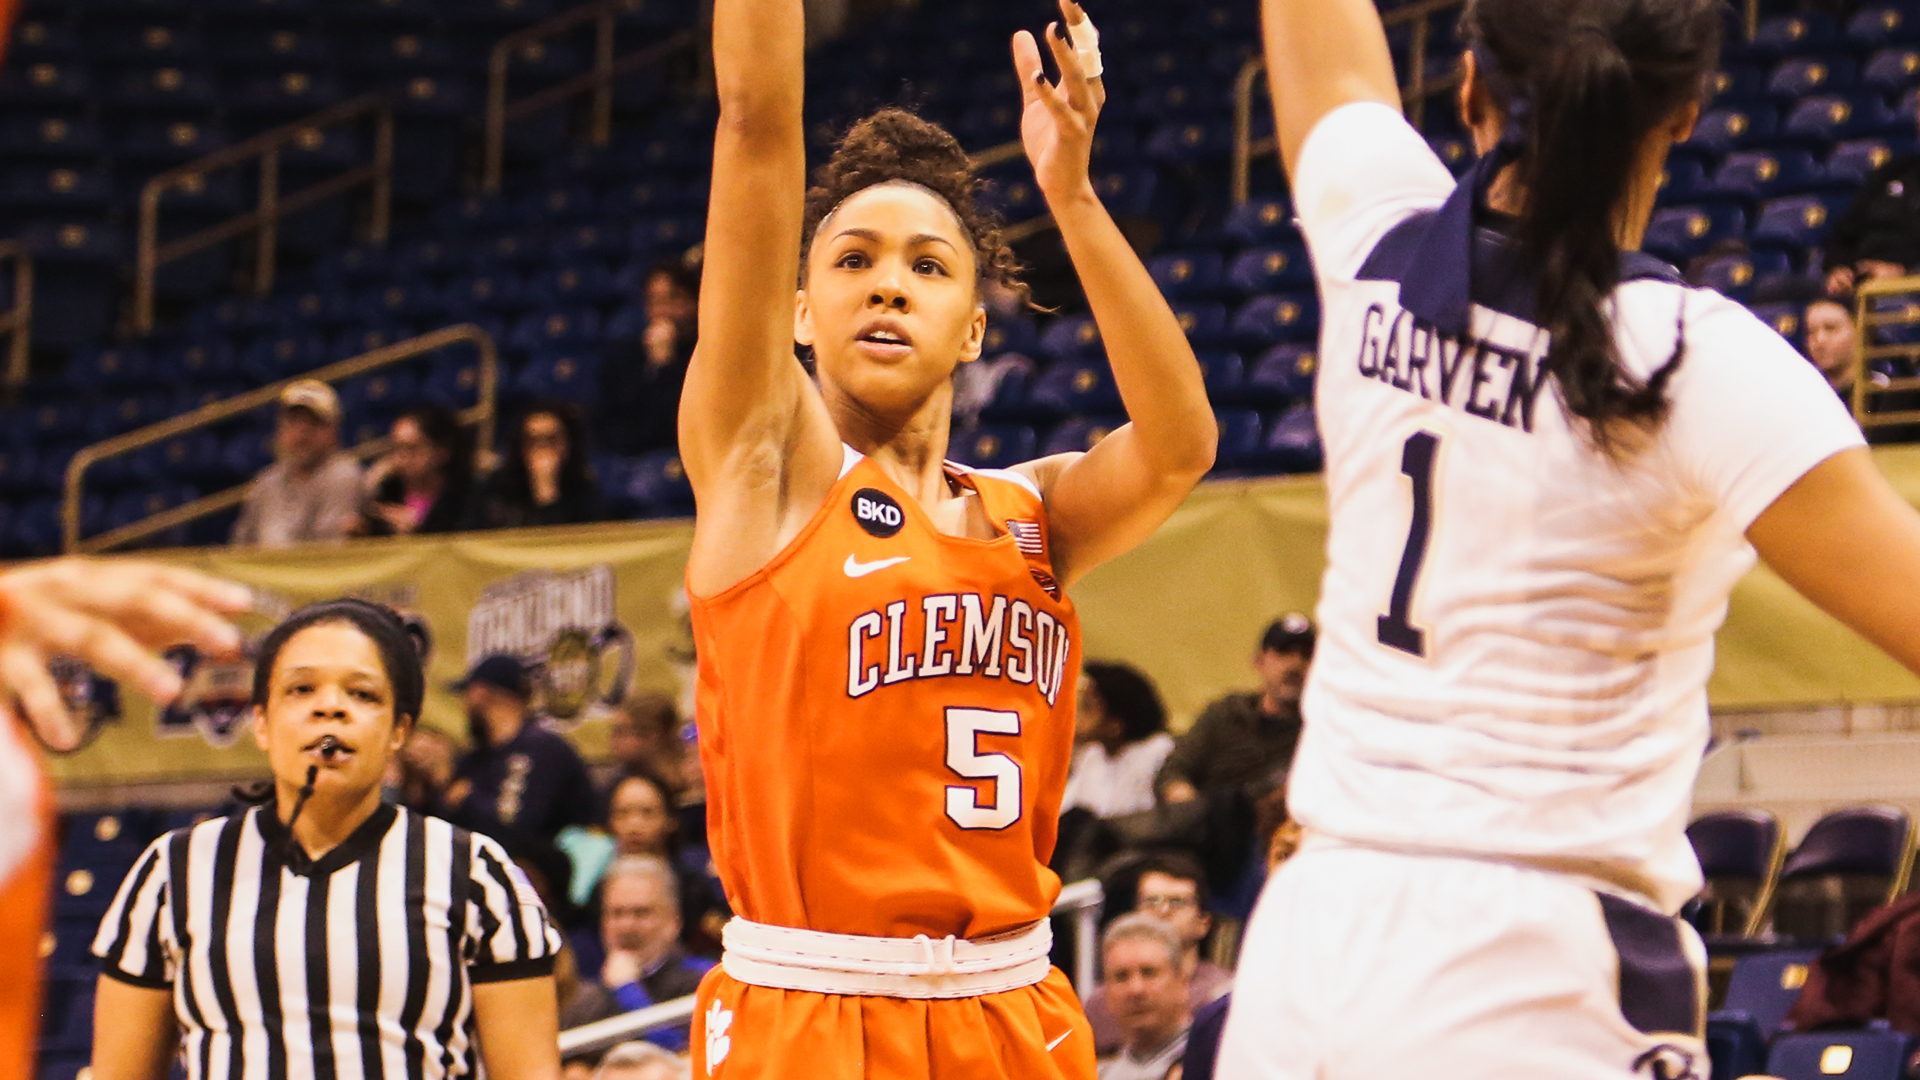 Thursday, January 31 at 7pm – Women's Basketball — Clemson Tigers Official ...1920 x 1080